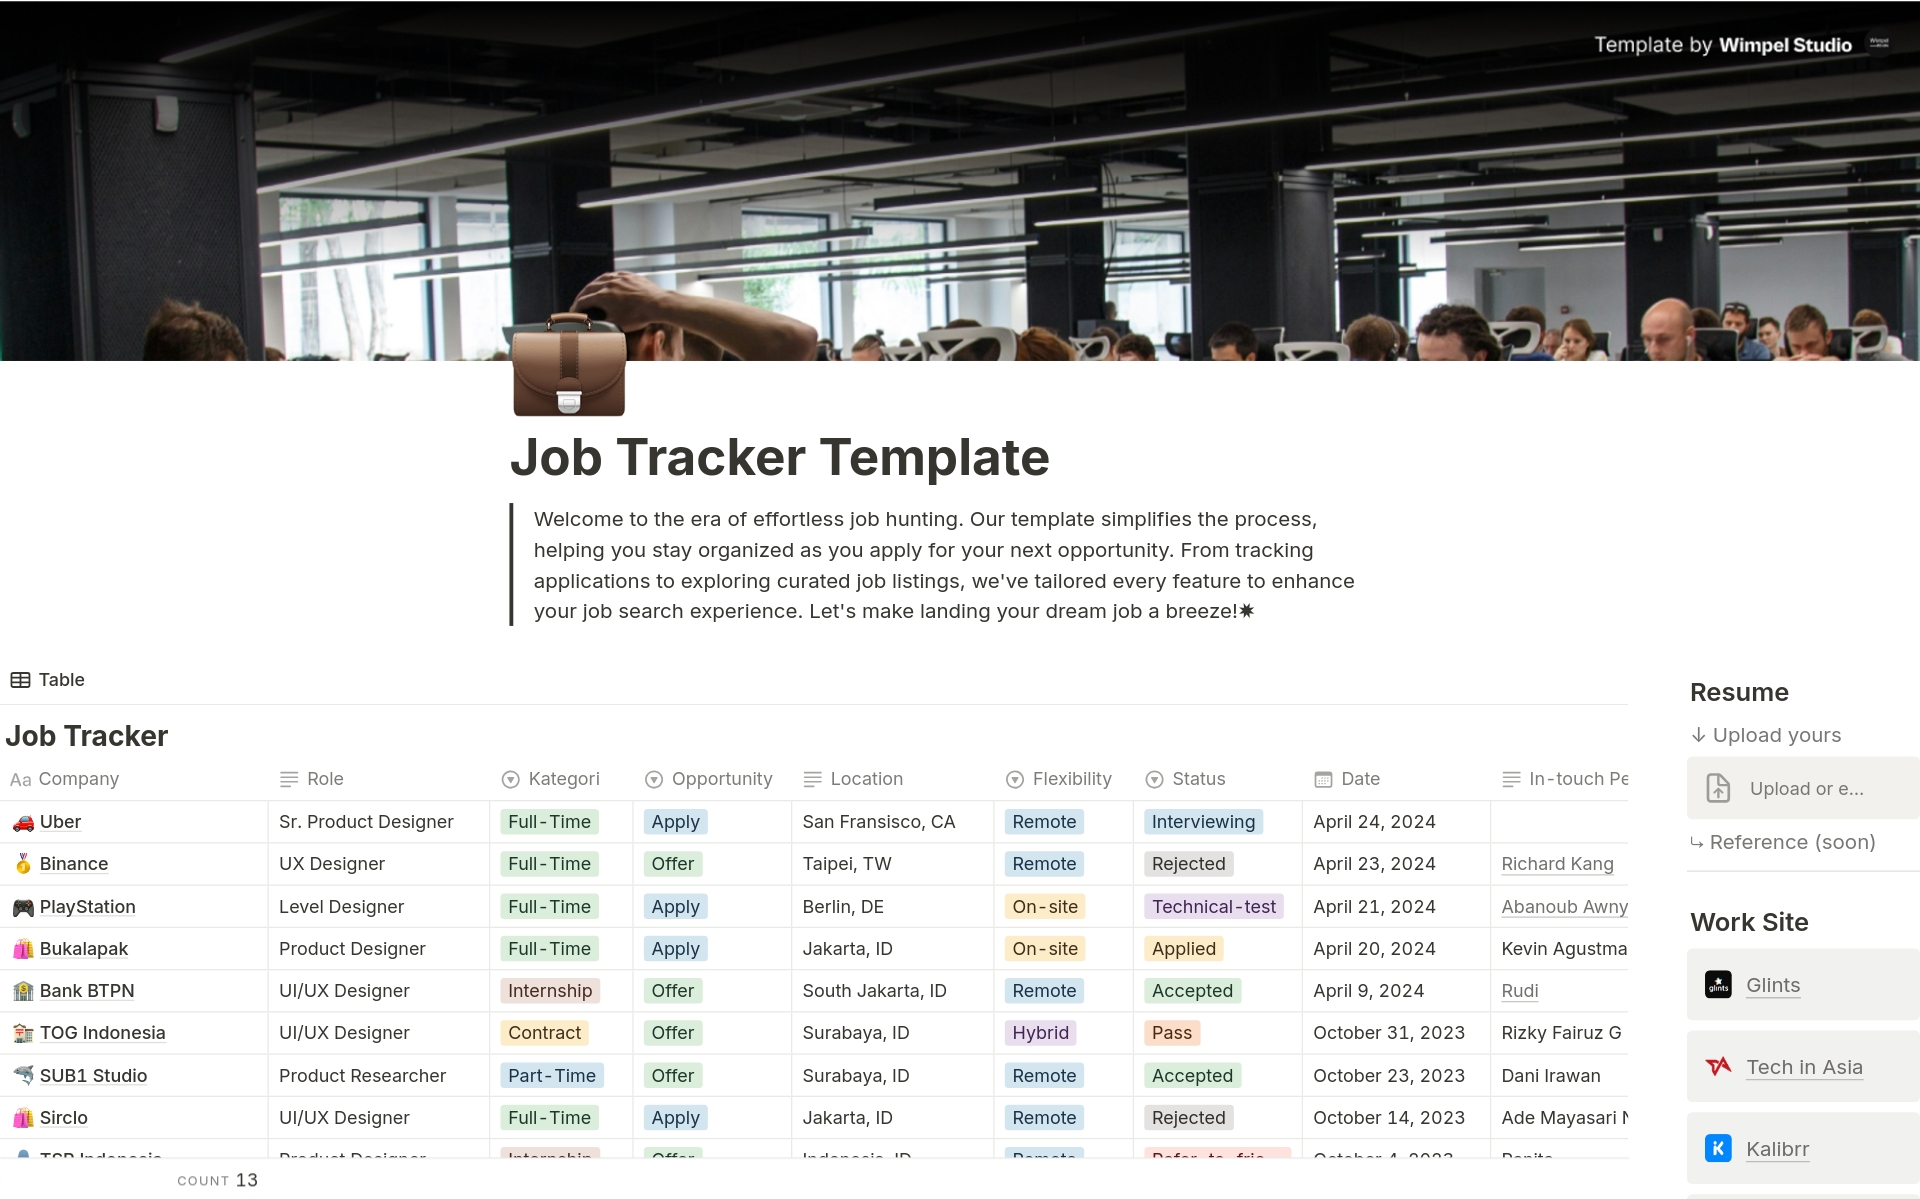 Elevate Your Job Hunt with our Notion Template

Revolutionize your job search with our Notion Template. Stay organized, track applications, and explore curated listings—all in one place. Join now for streamlined success!